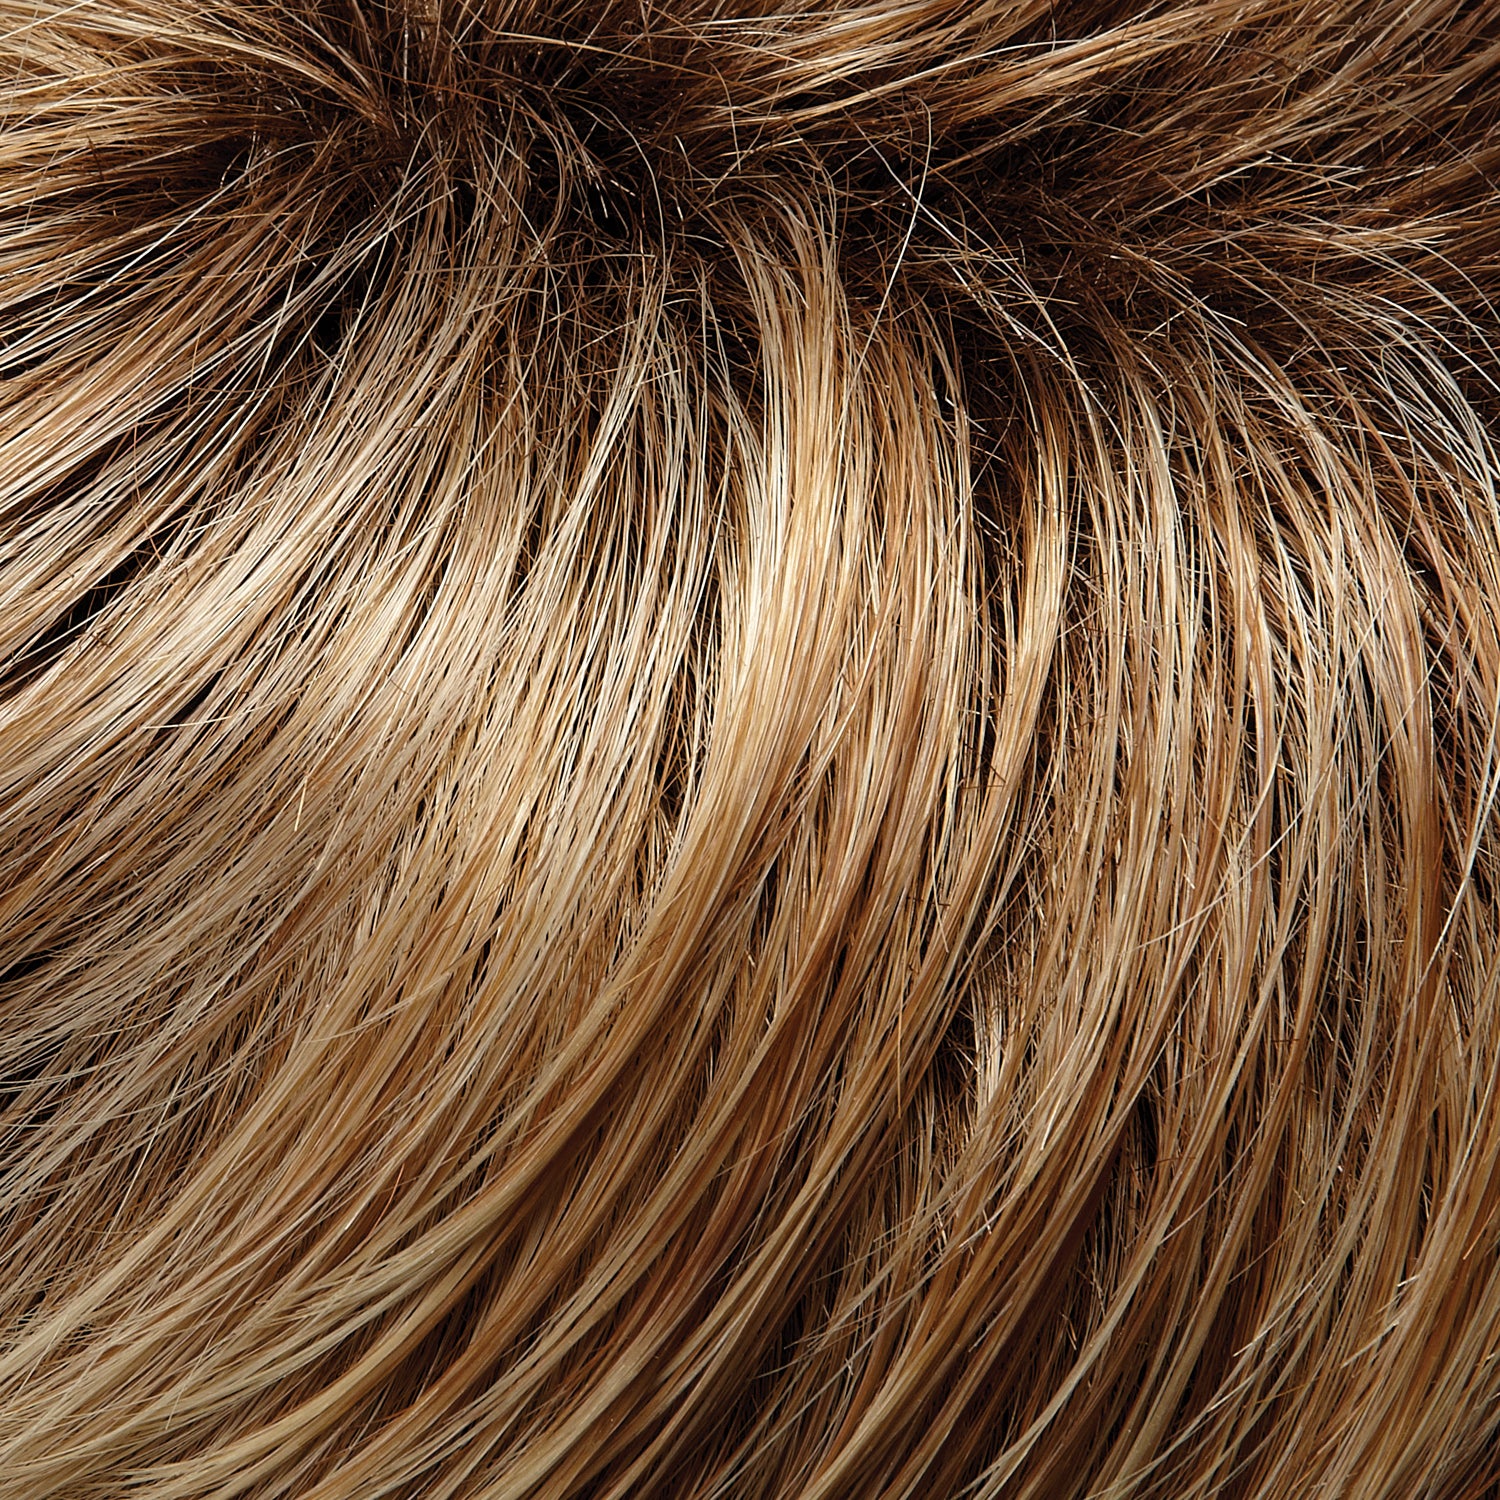 27T613S8 SHADED SUN Strawberry Blonde/Warm Platinum Blonde Blend, Shaded with Medium Brown